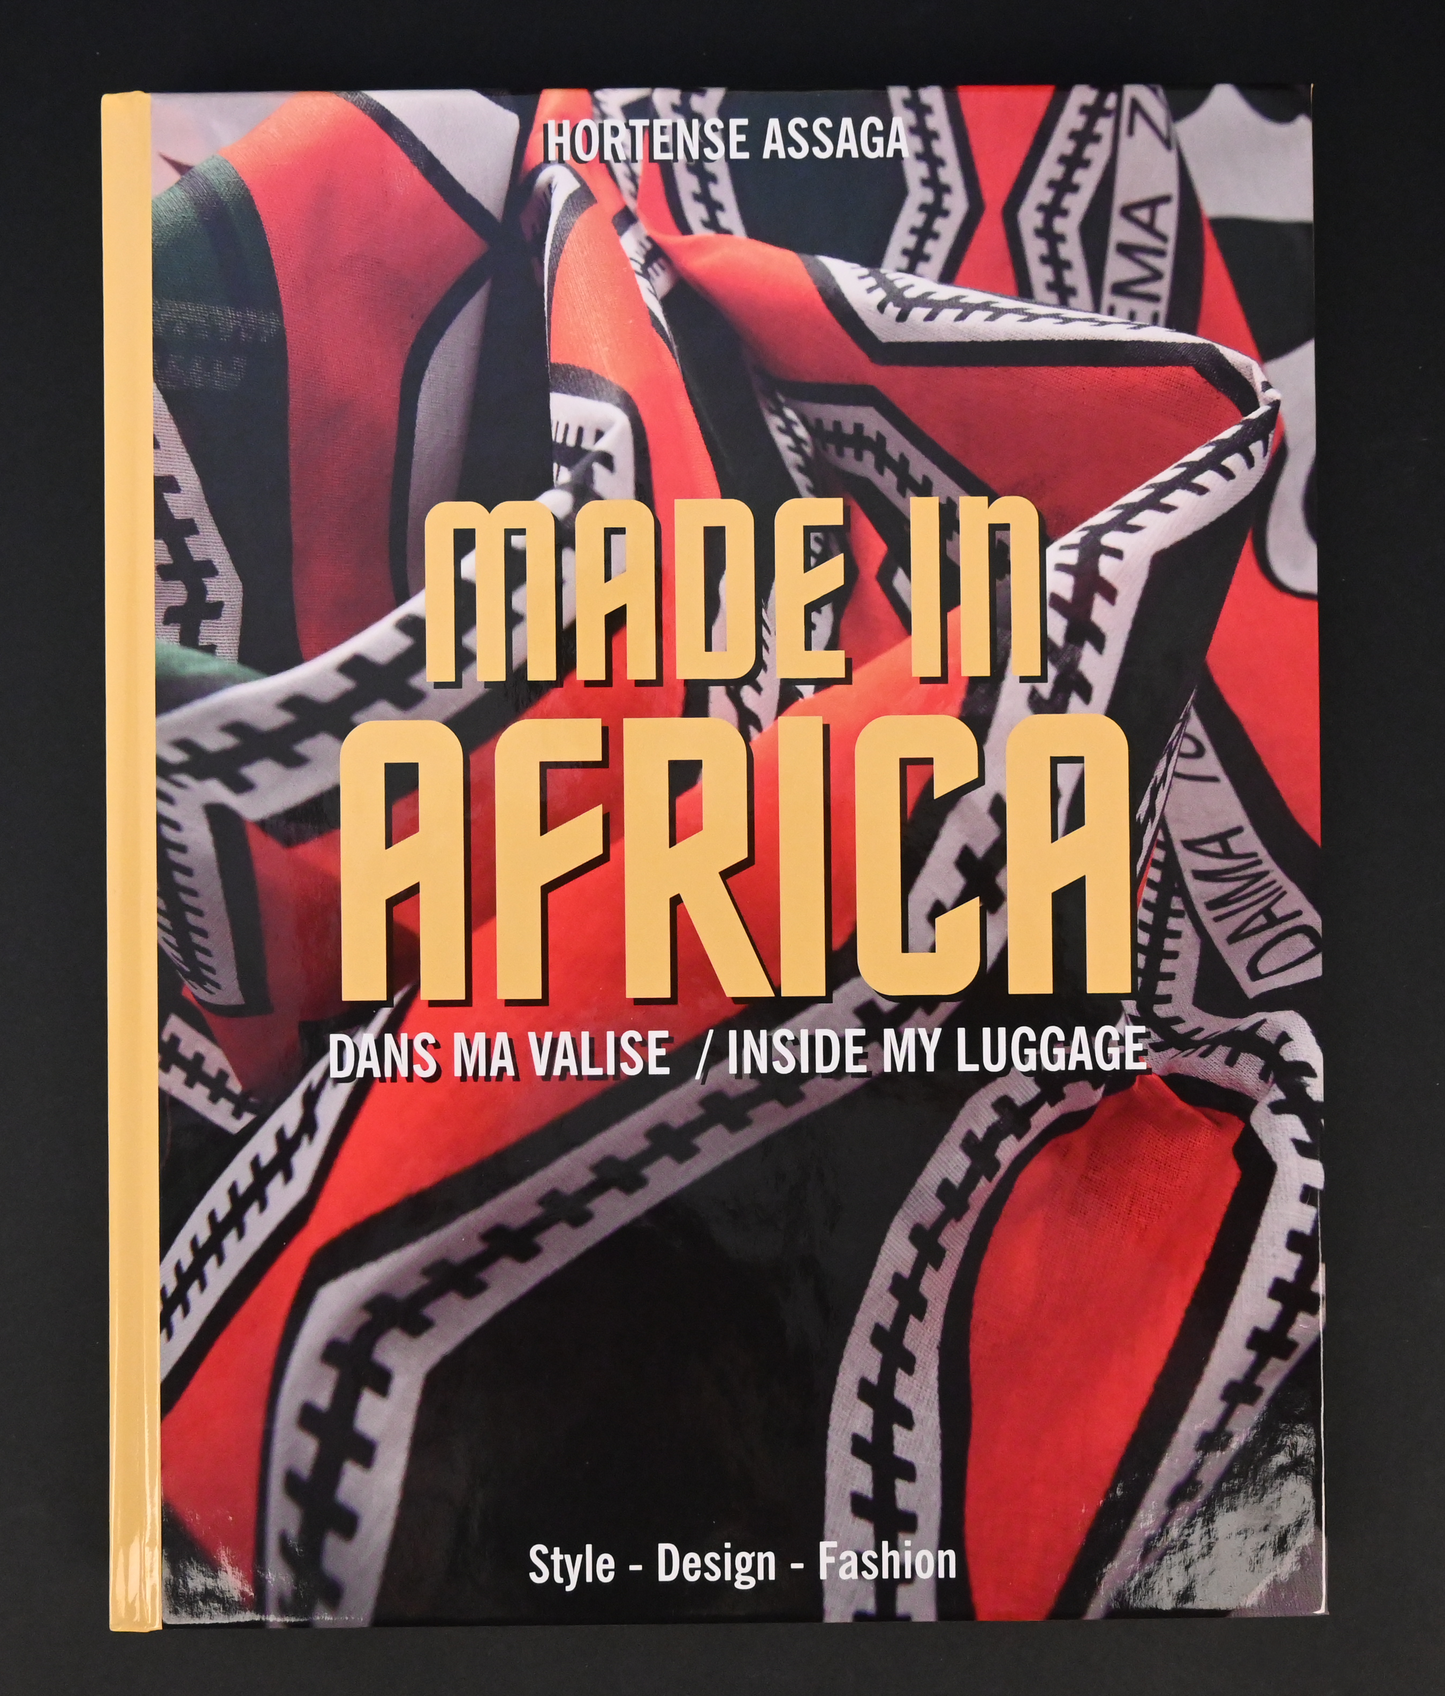 Made in Africa-Dans ma valise / inside my luggage